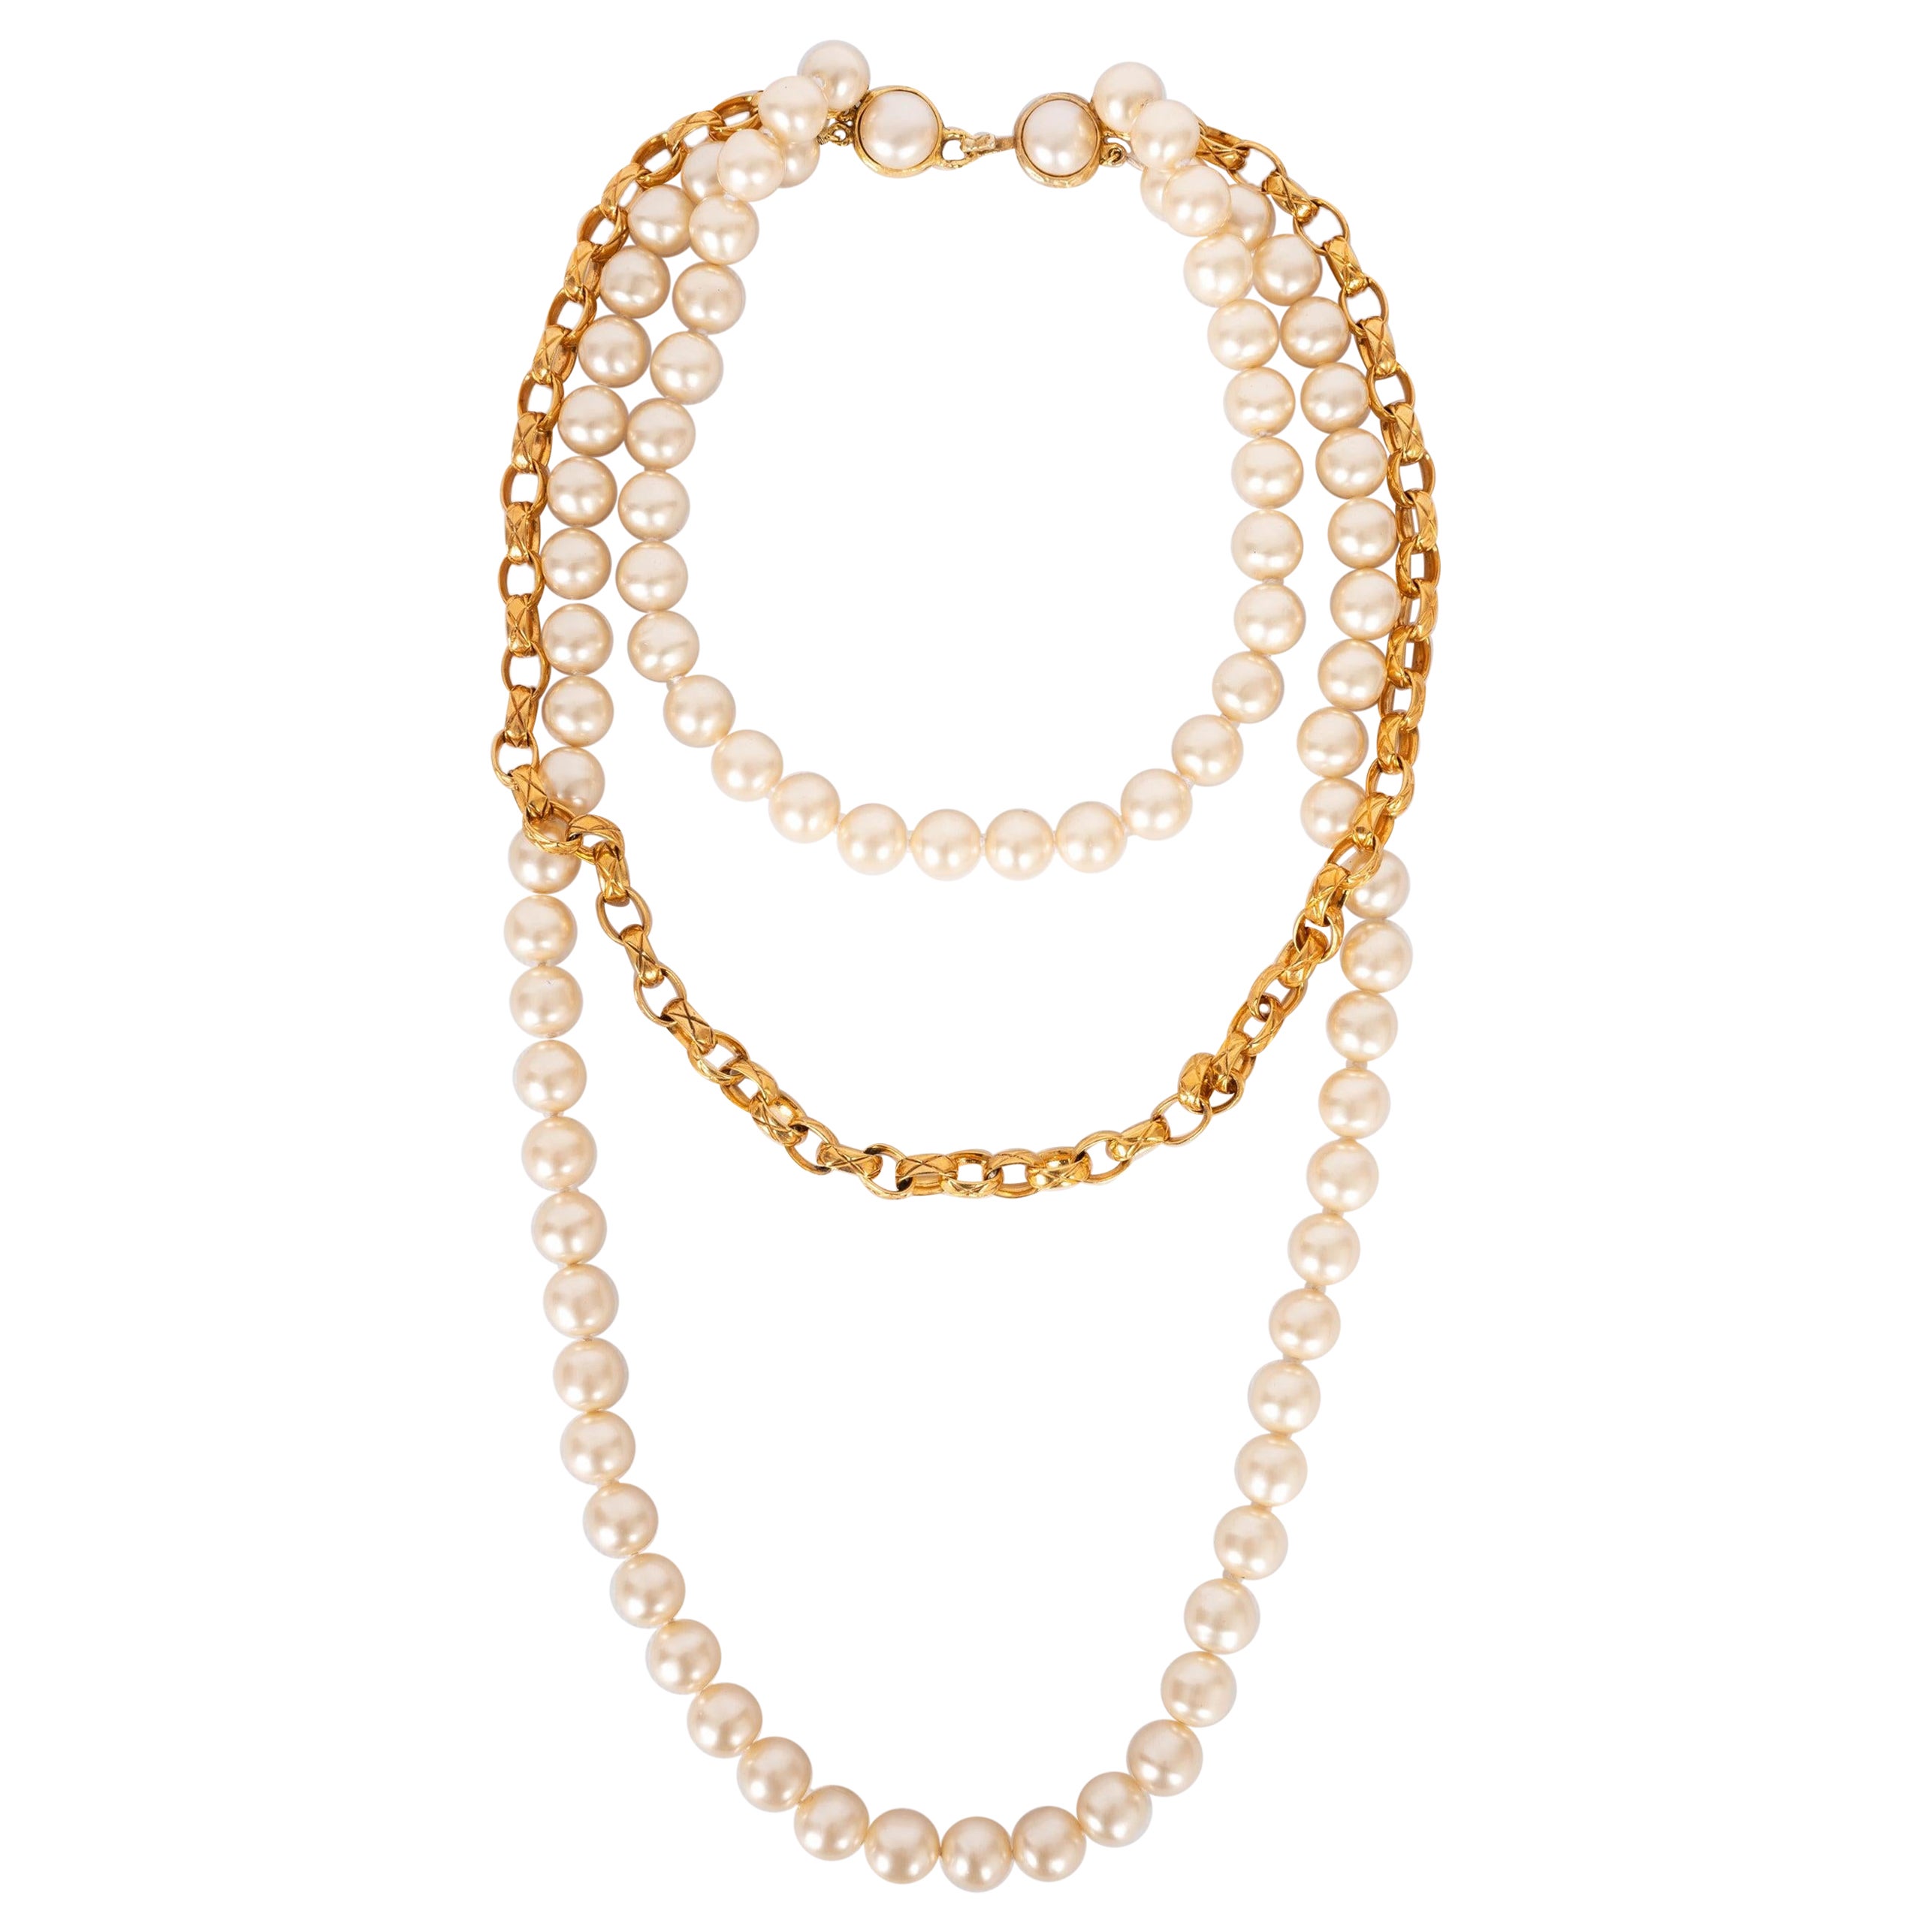 Chanel Necklace in Gold-Plated Metal and Costume Pearly Beads, 1990s For Sale